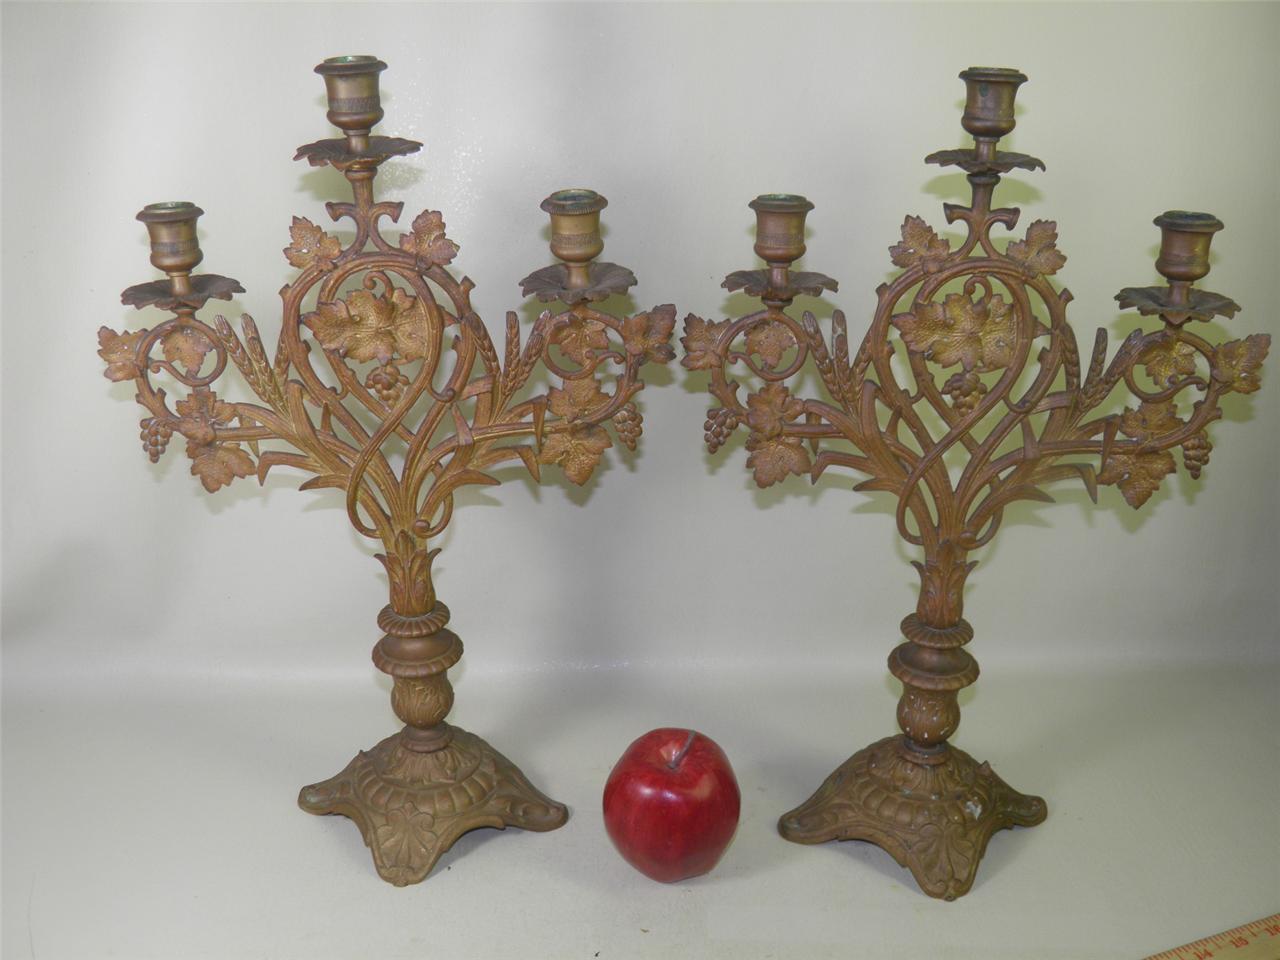 ANTIQUE BRONZE CANDLELABRA PAIR ORNATE THREE CANDLE HOLDERS GRAPES WHEAT